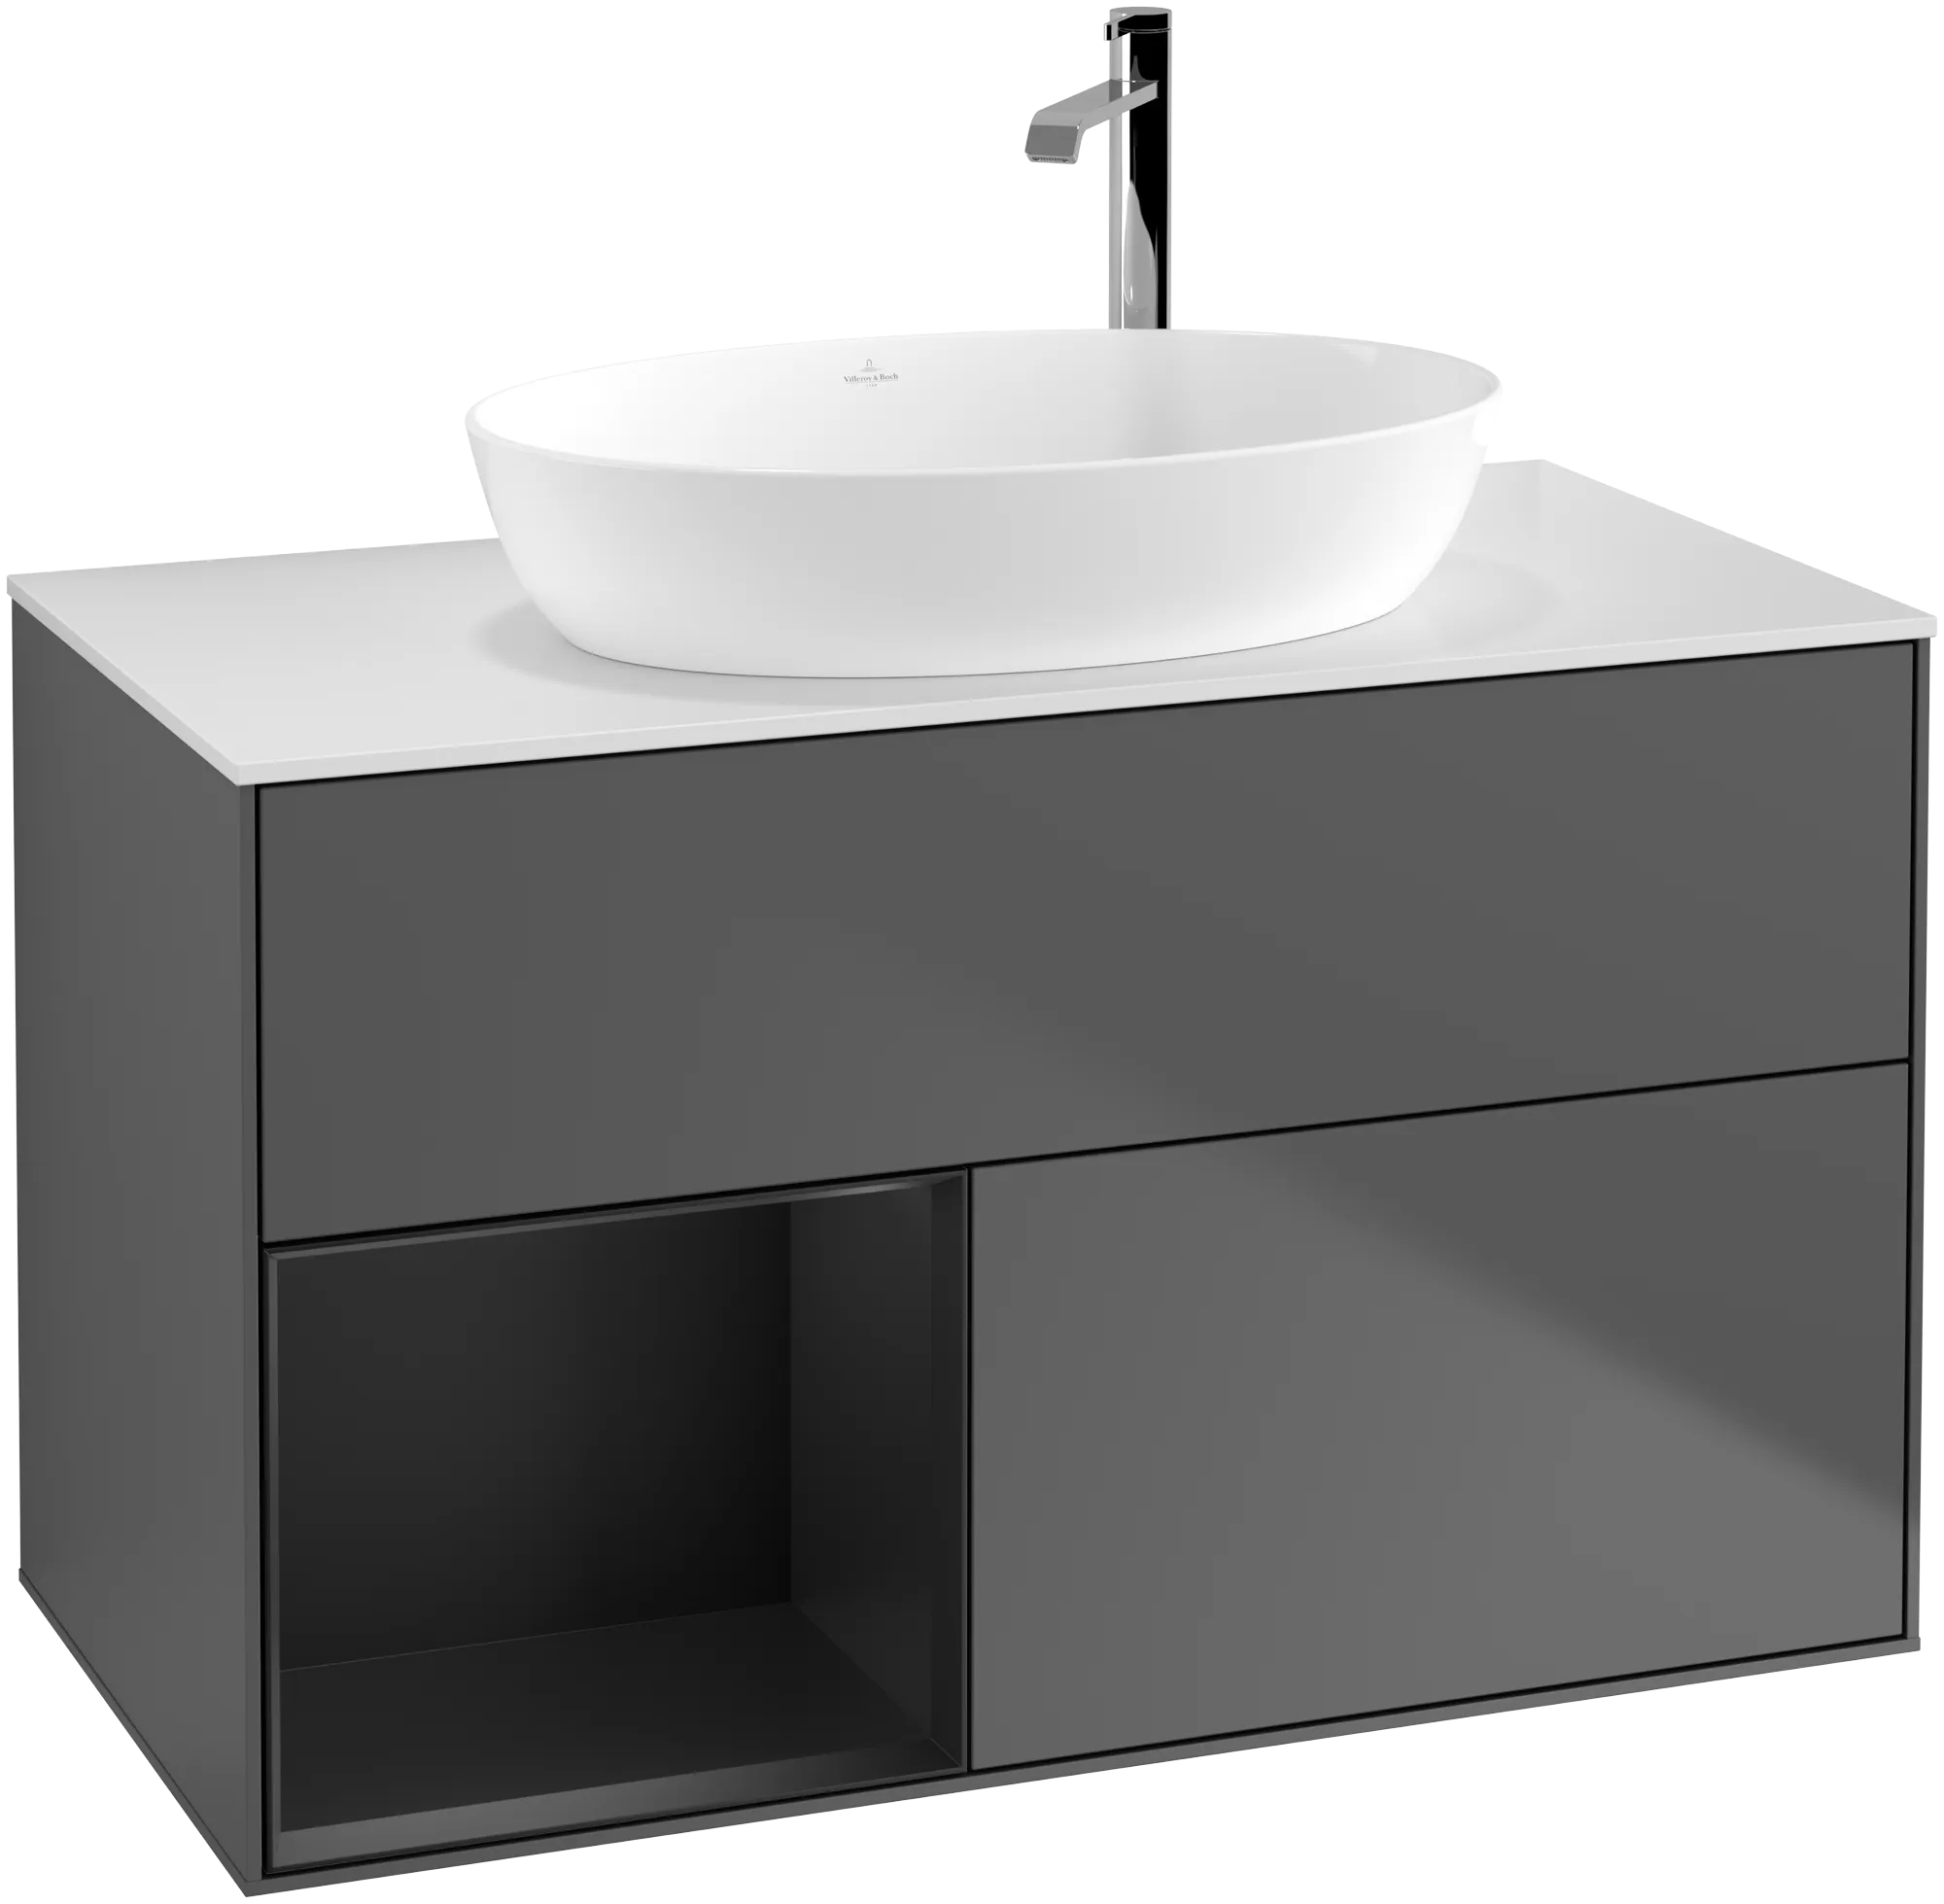 Picture of VILLEROY BOCH Finion Vanity unit, with lighting, 2 pull-out compartments, 1000 x 603 x 501 mm, Anthracite Matt Lacquer / Black Matt Lacquer / Glass White Matt #G891PDGK